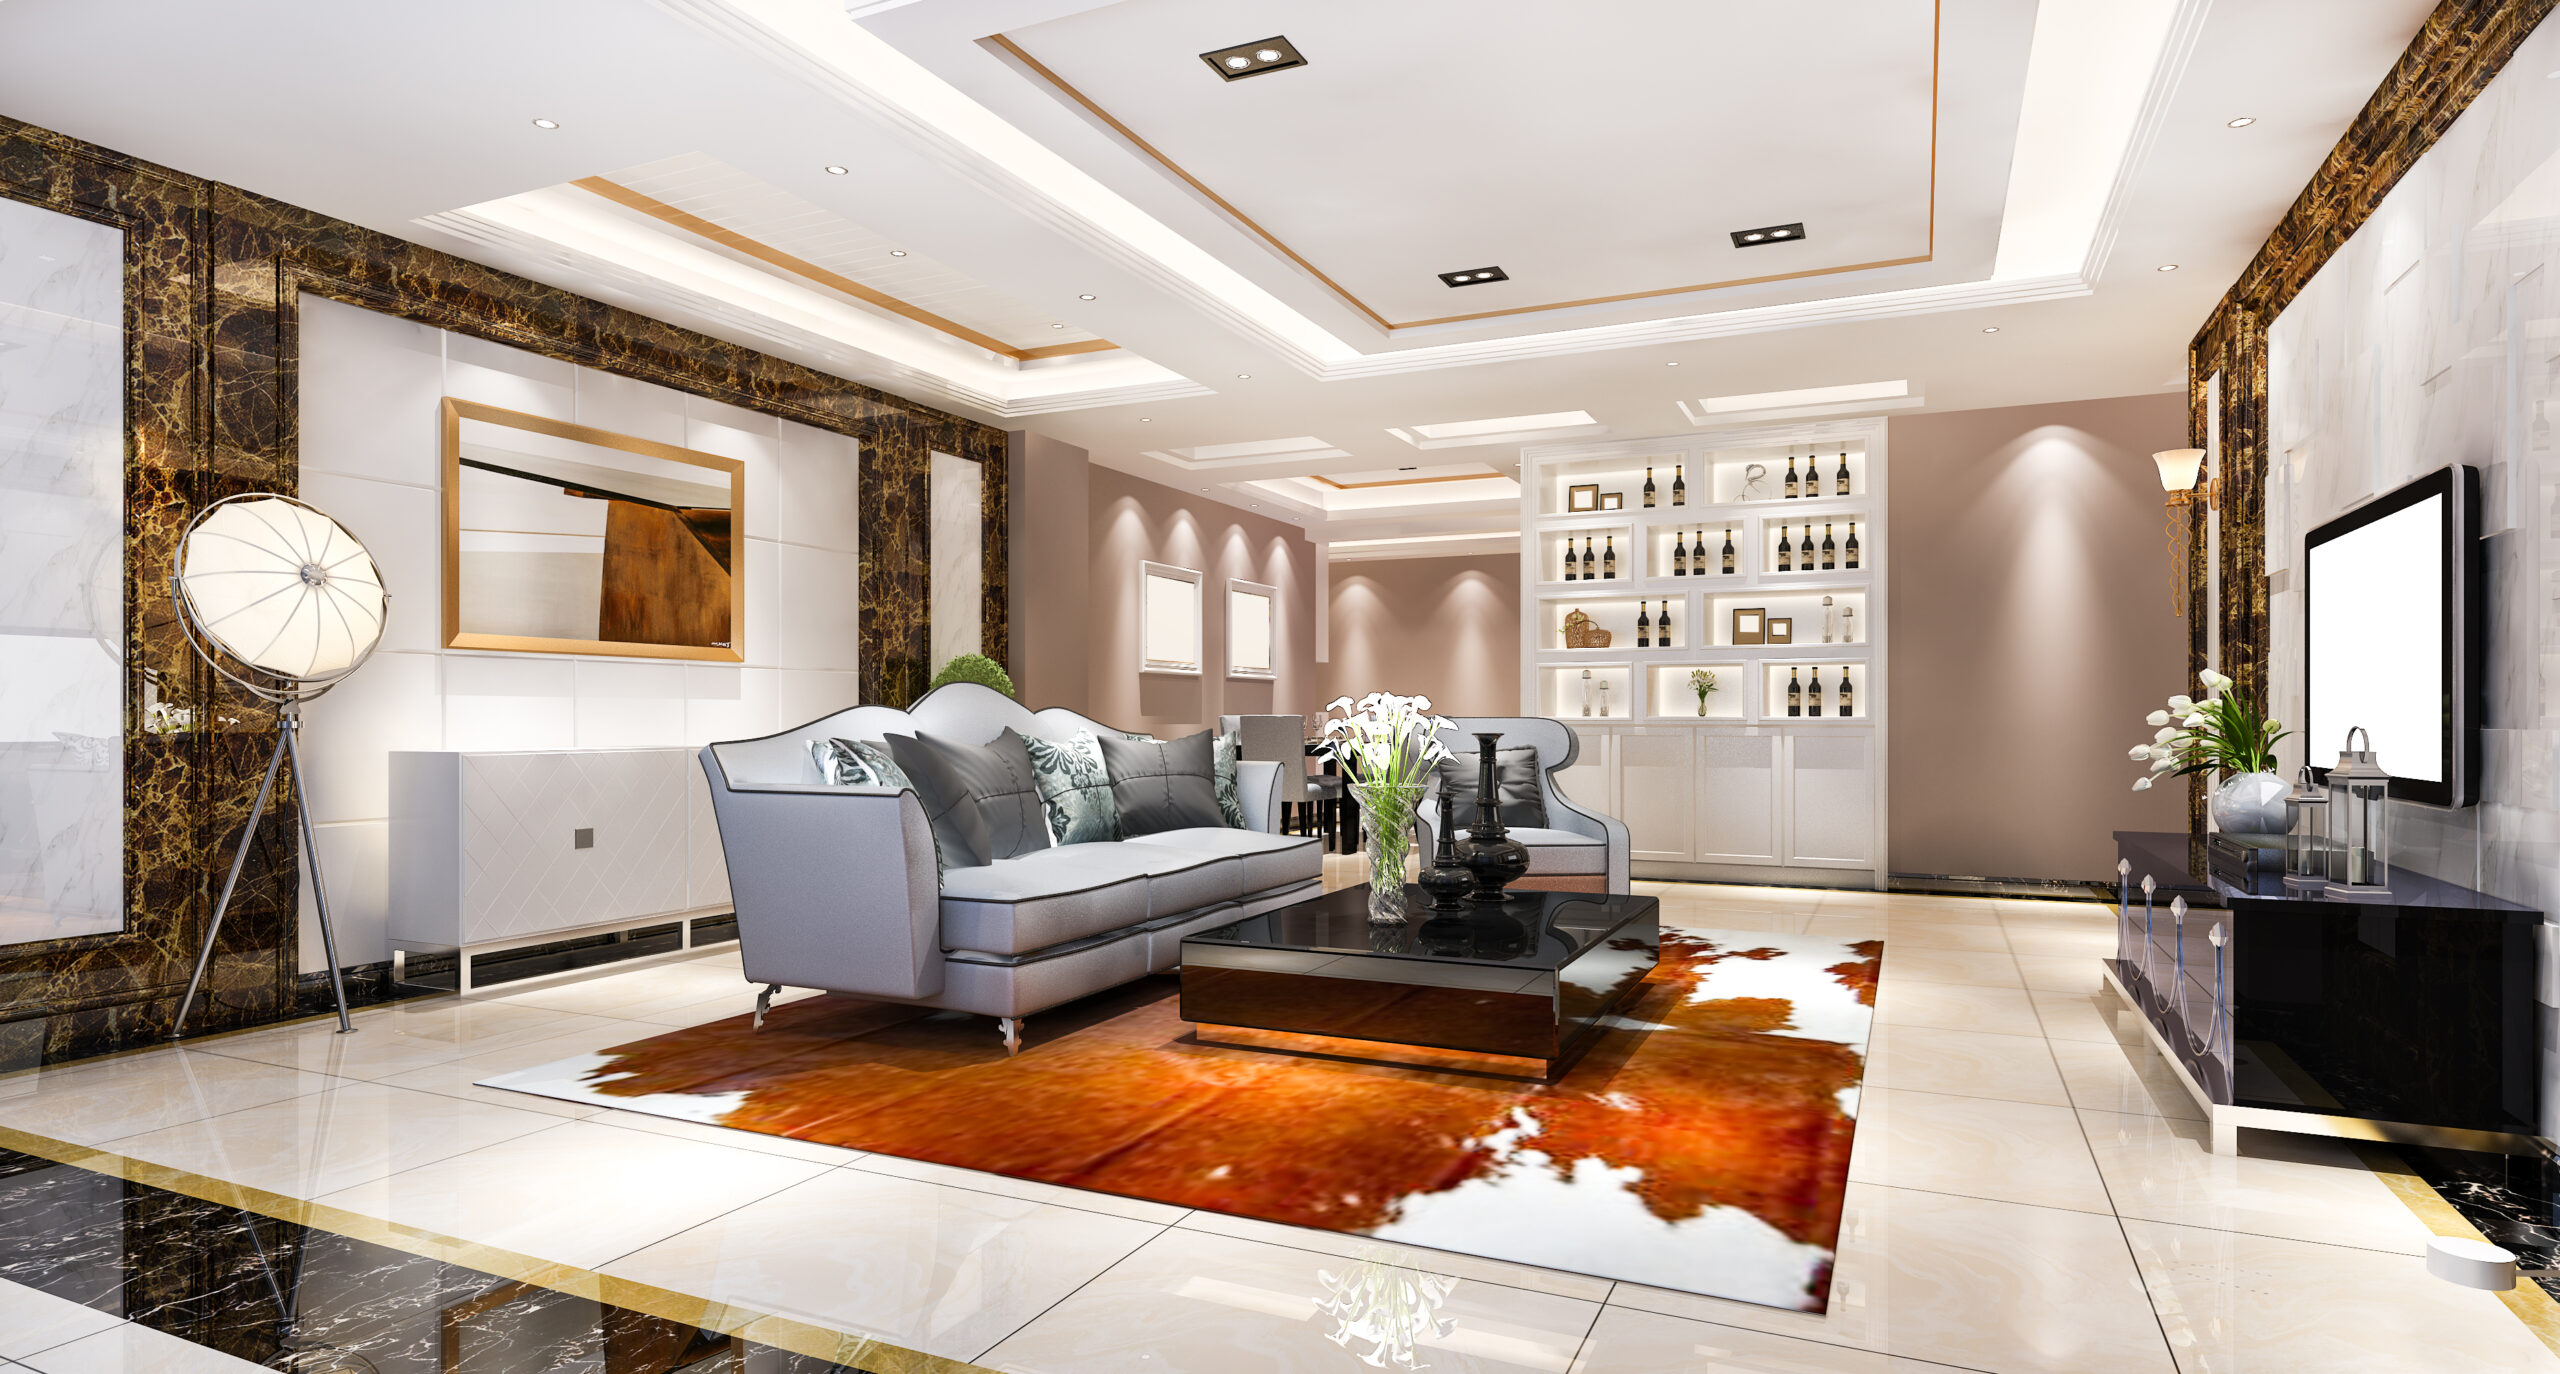 Here is an 3d rendering image of modern living room fully furnished